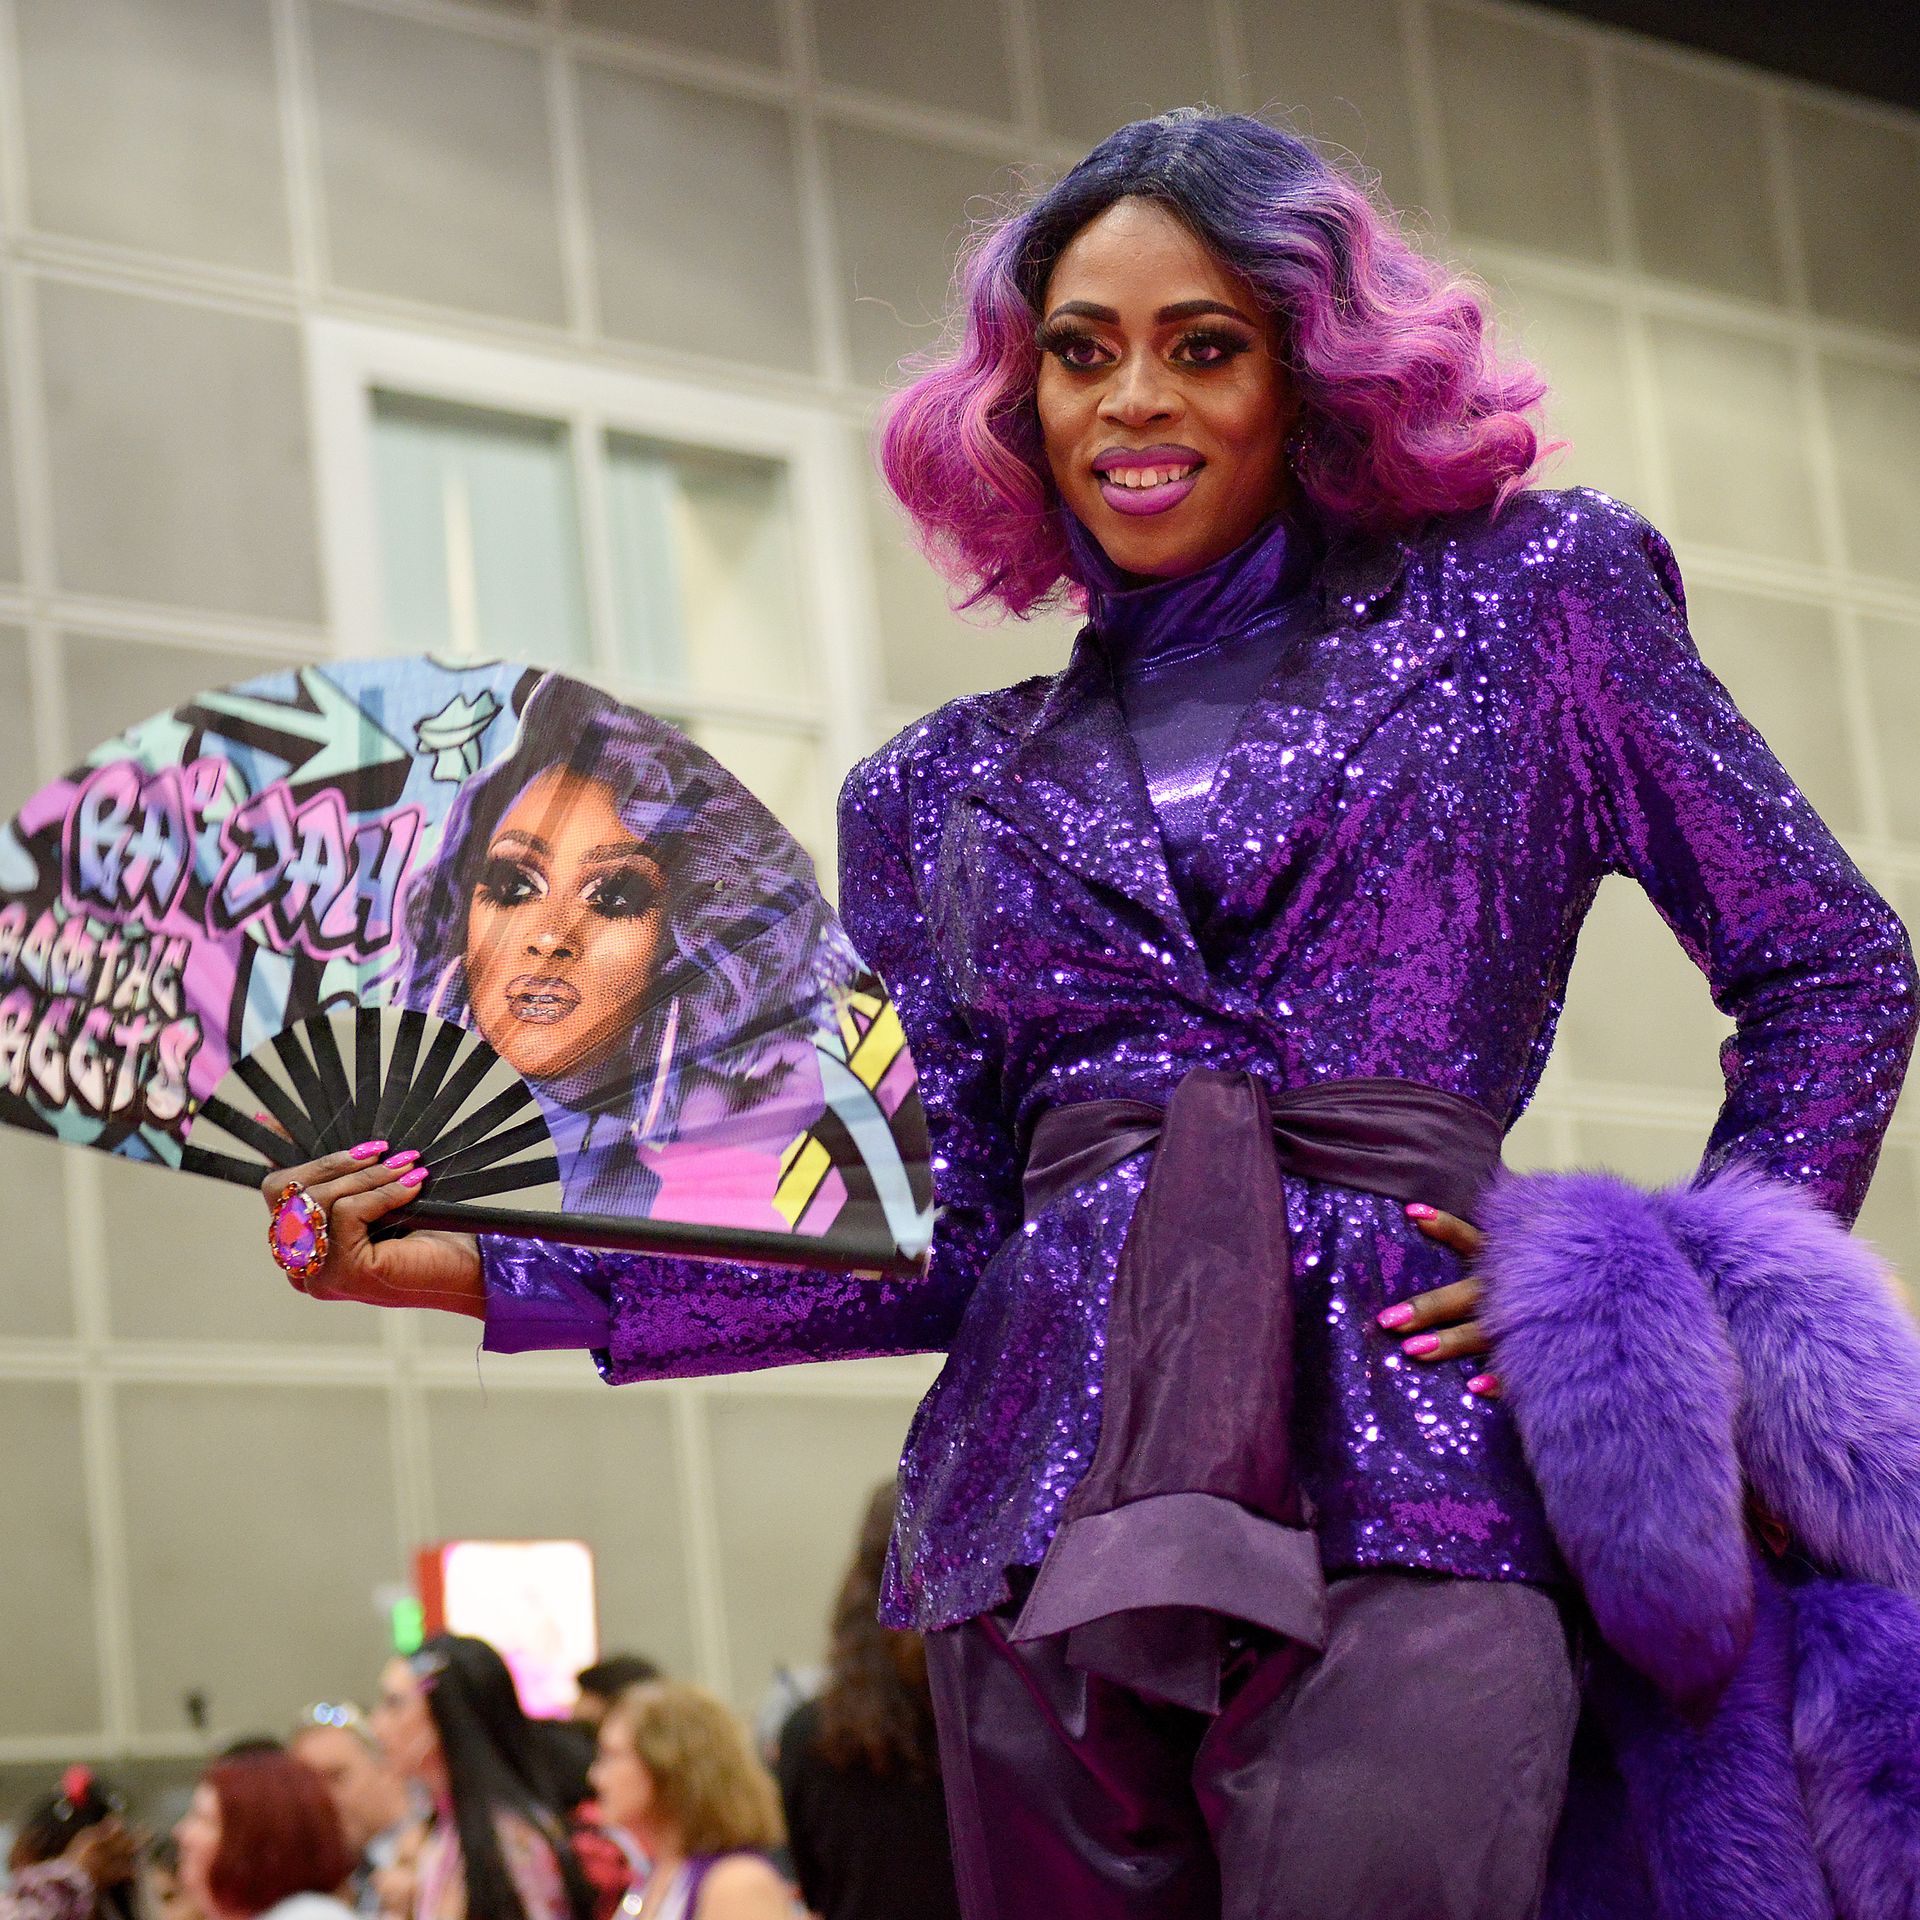 Ra'Jah O'Hara in a purple outfit with a fan reading "Ra'Jah from the streets"